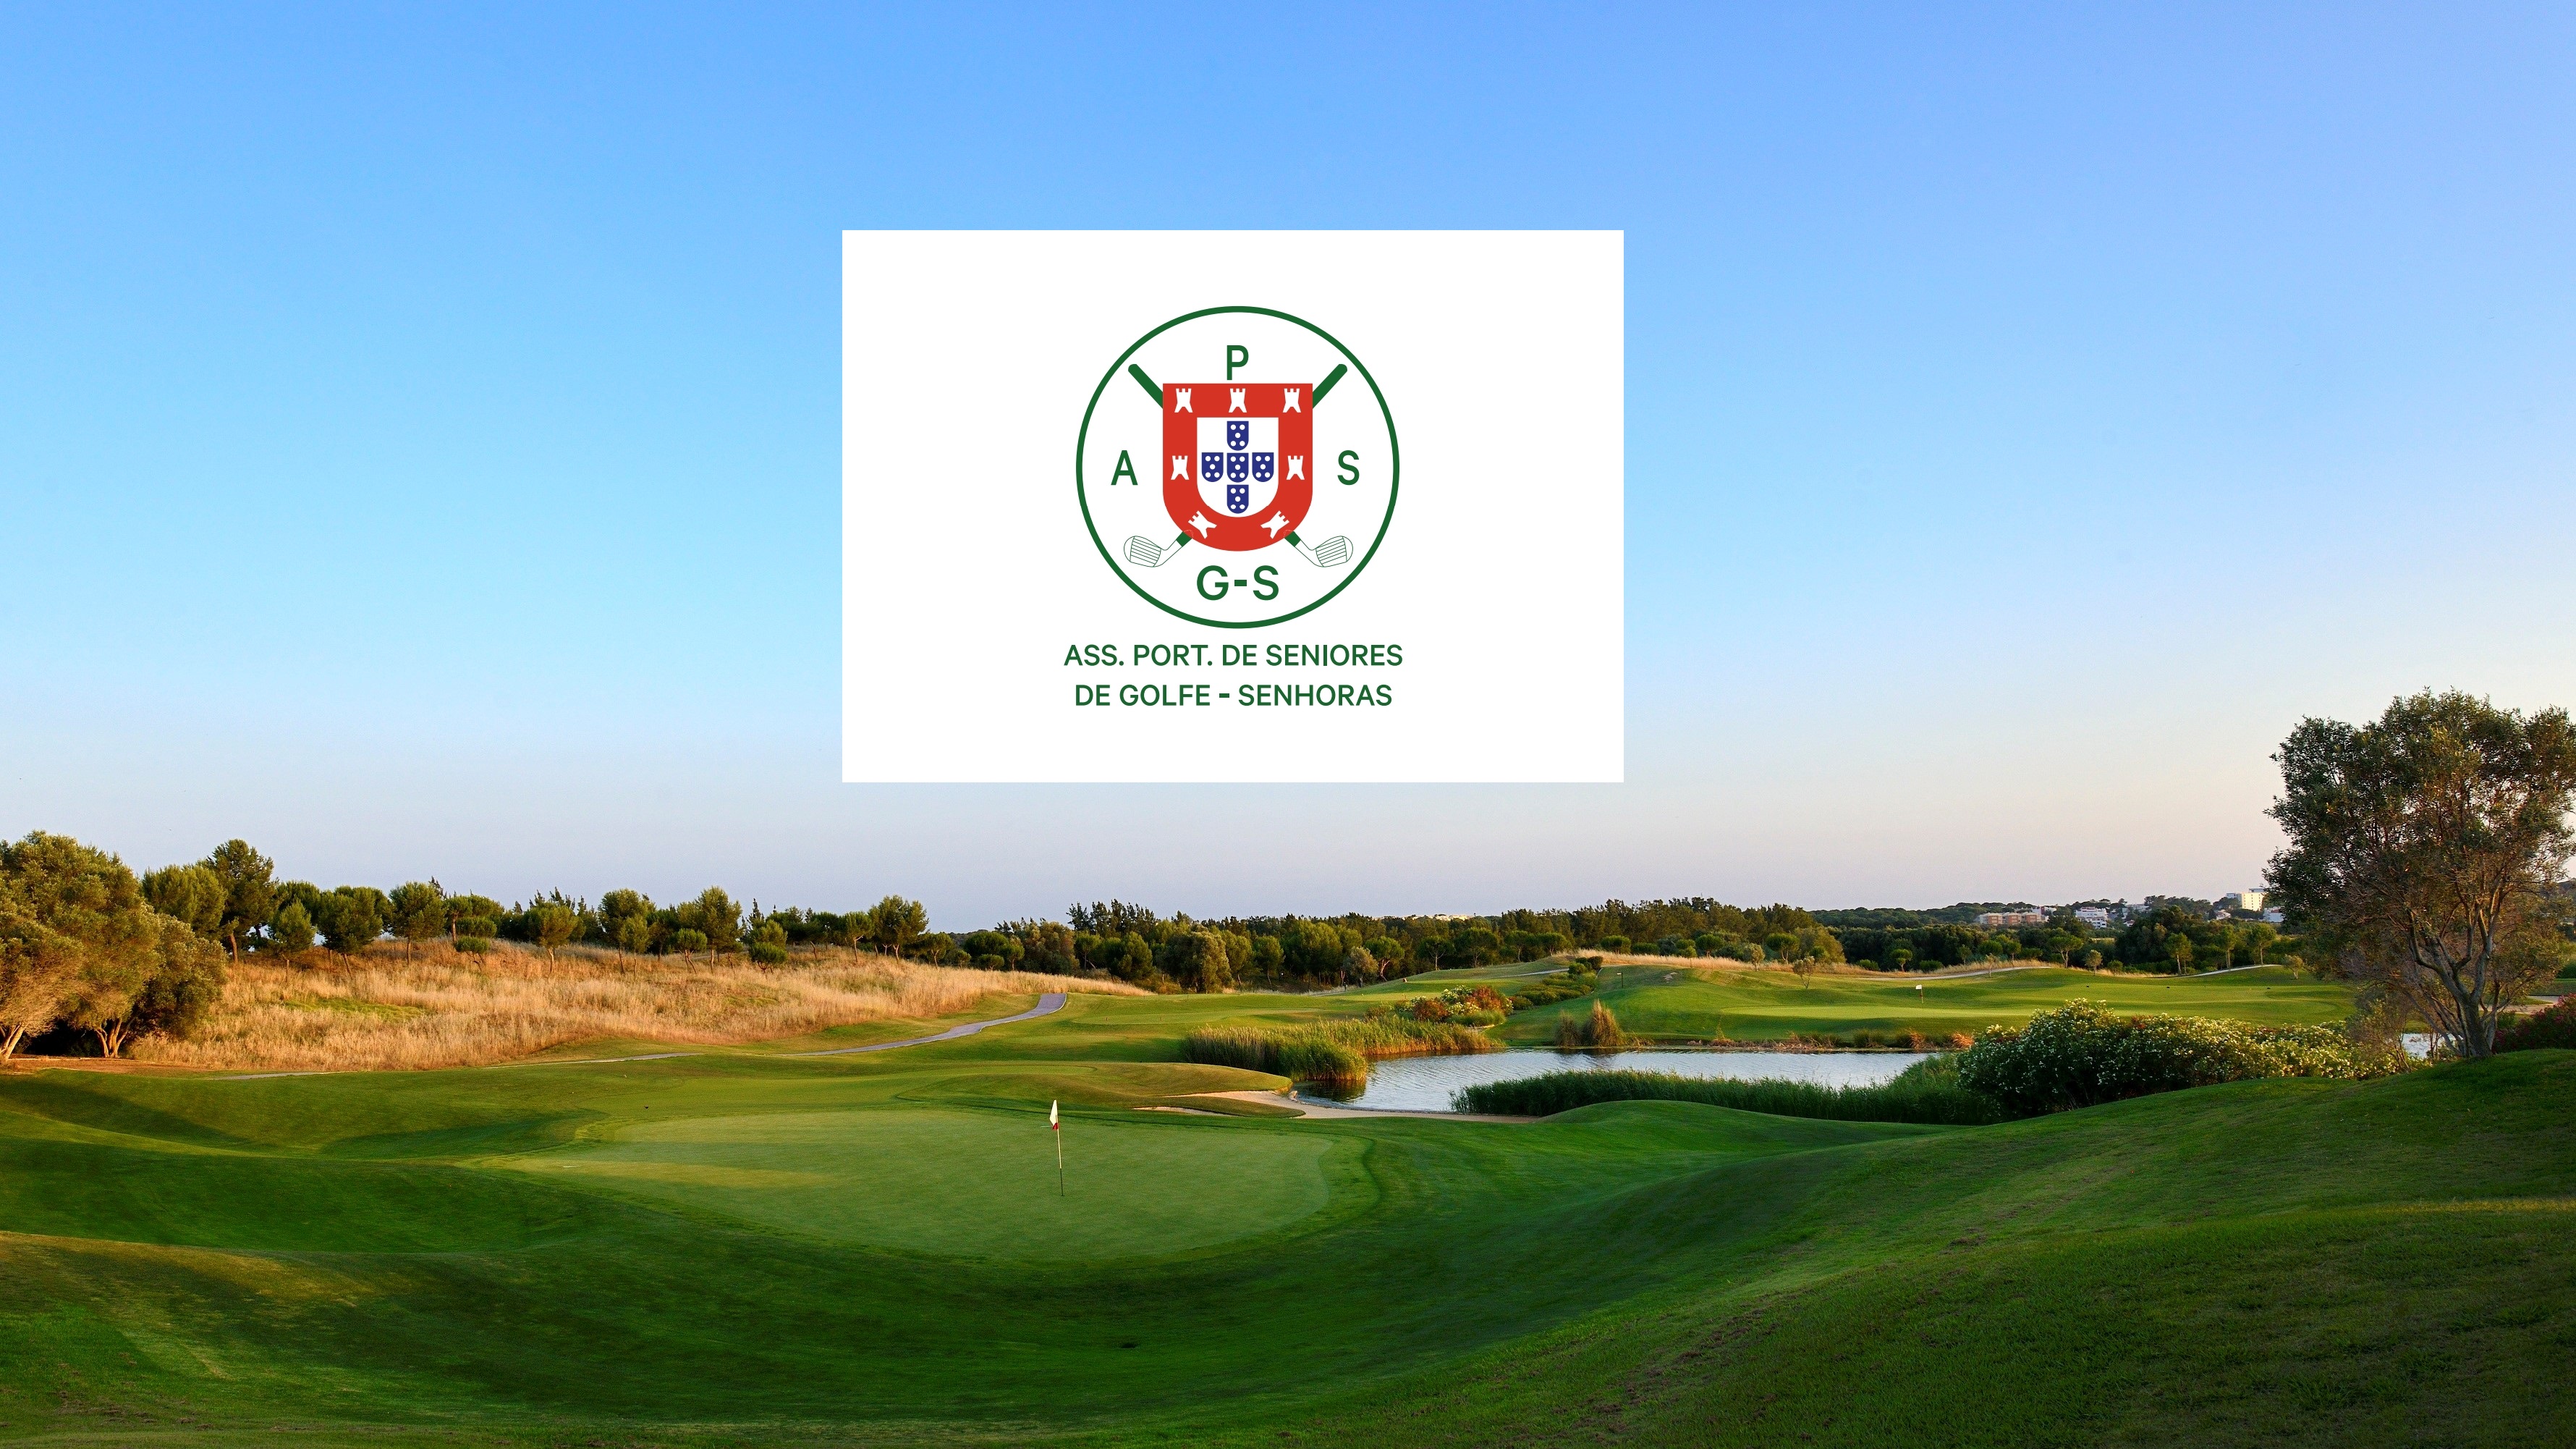 Golf course where International Portuguese Senior Ladies Golf Competition takes place